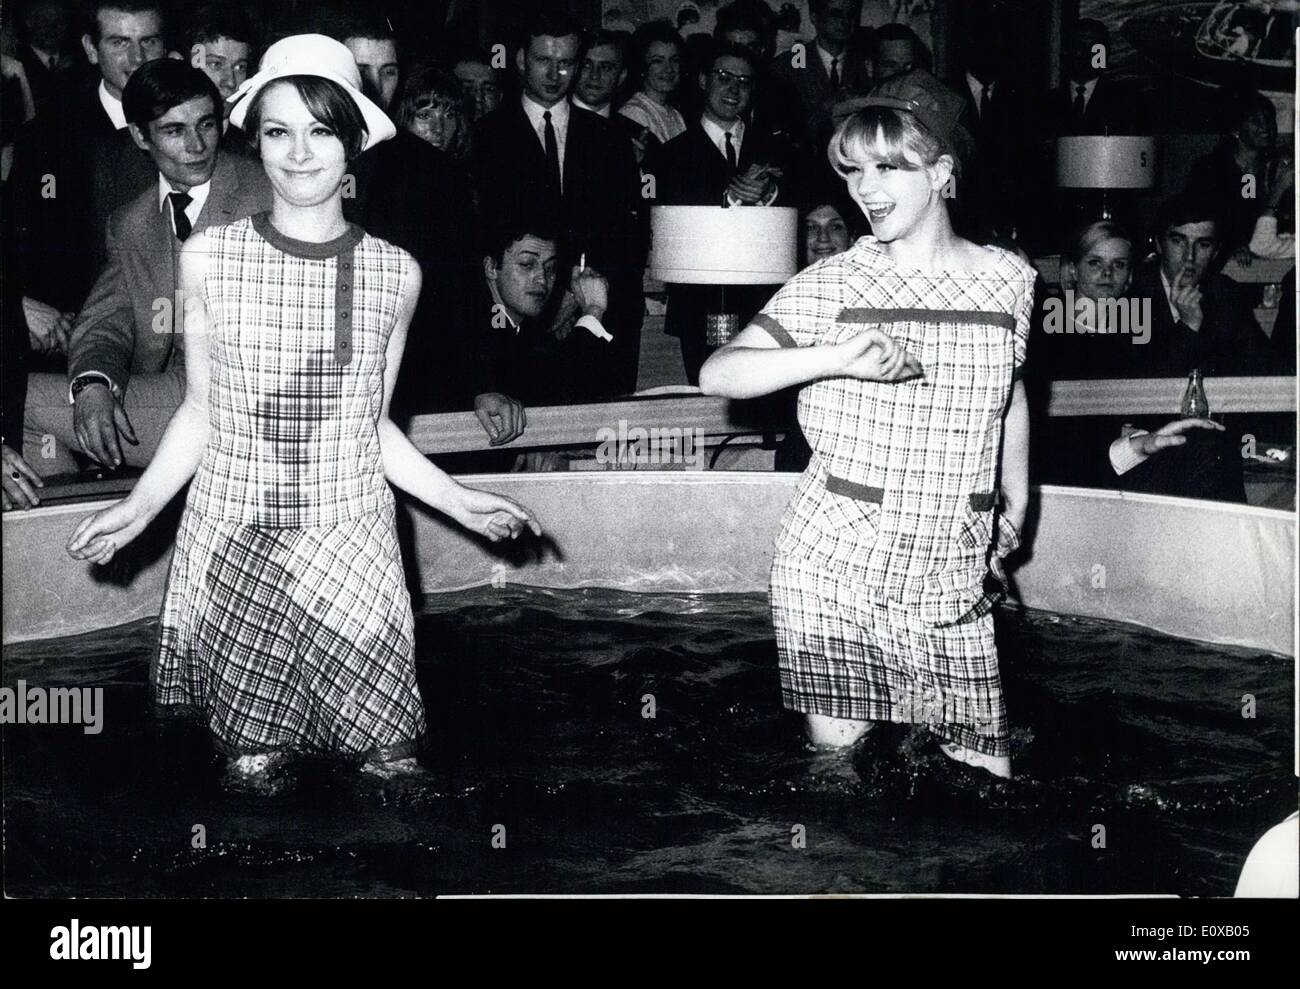 Mar. 03, 1966 - A SOMEWHAT UNCONVENTIONAL FINISH.. took place on a fashion show, which was held in a bar in Berlin on the occasion of ''die 63. Berliner Durchreise (a German fashion show which takes place every year). At the end of this fashion show for young girls, two mannequins went into the water (our picture) not be because they just wanted to, but to prove that their beautiful models ''Trixi'' and ''Dixi'' could stand the water. Stock Photo